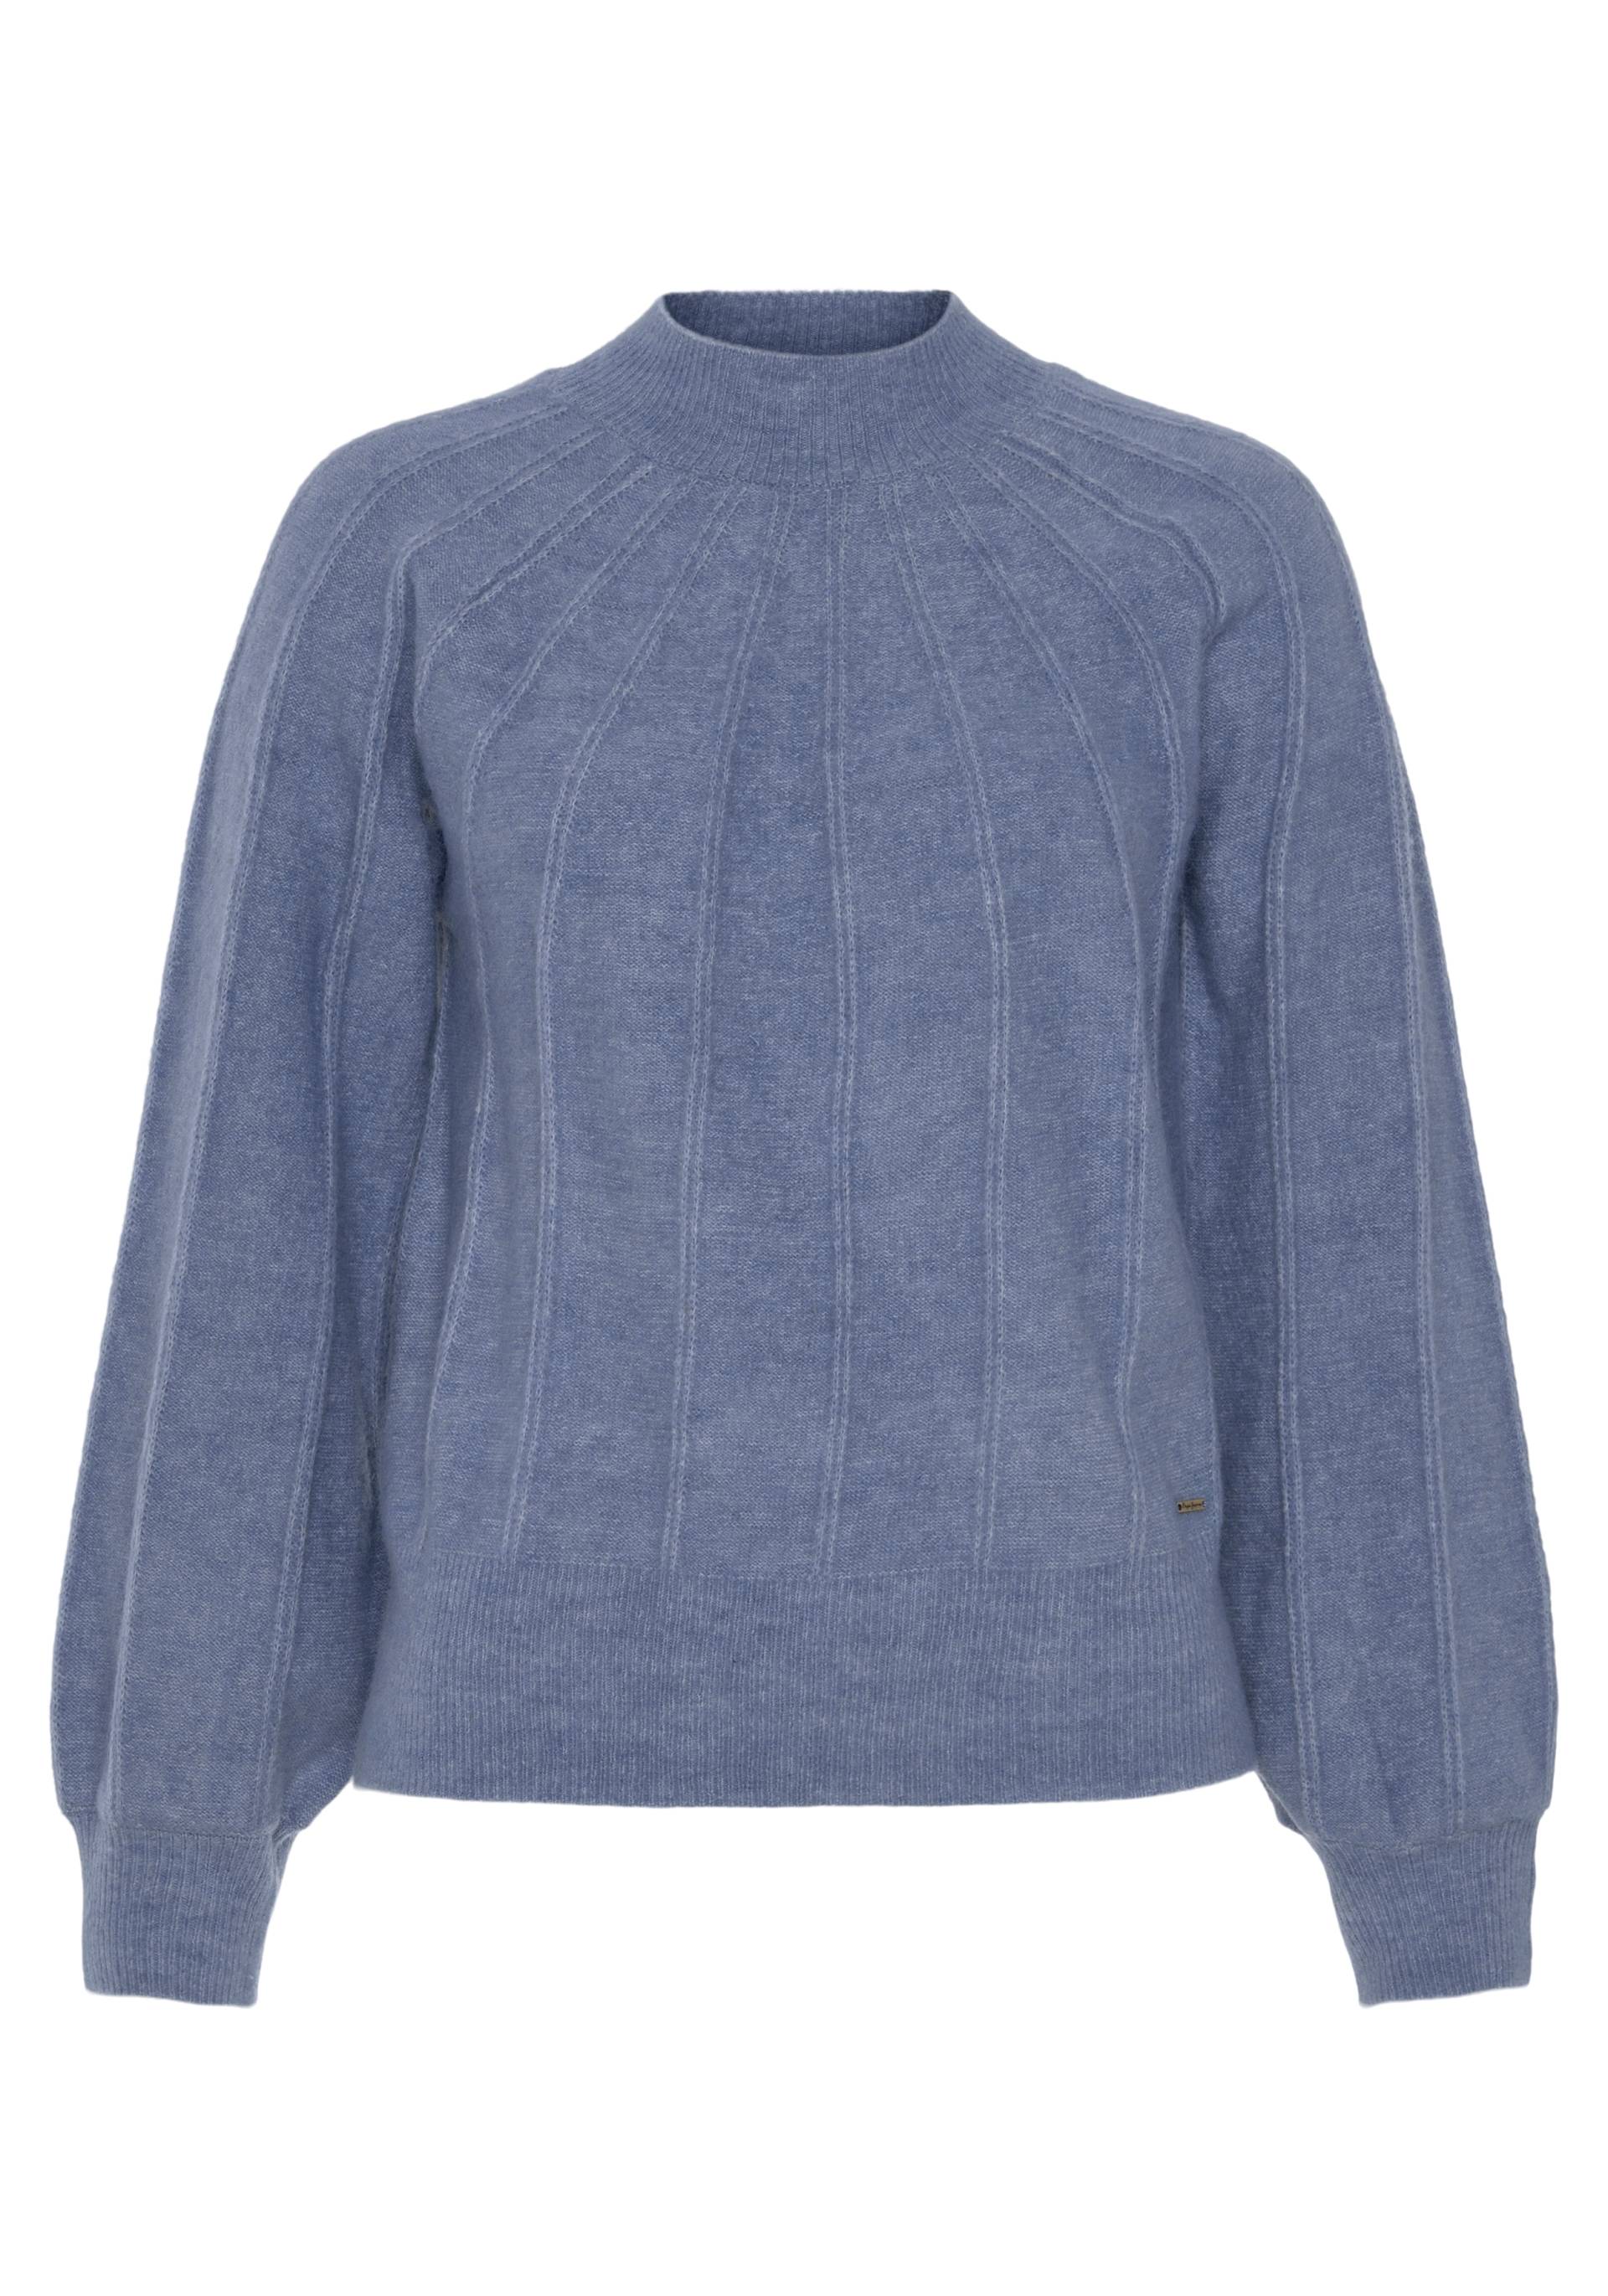 Pepe Jeans Strickpullover »KENDALL RO«, (1 tlg.) von Pepe Jeans